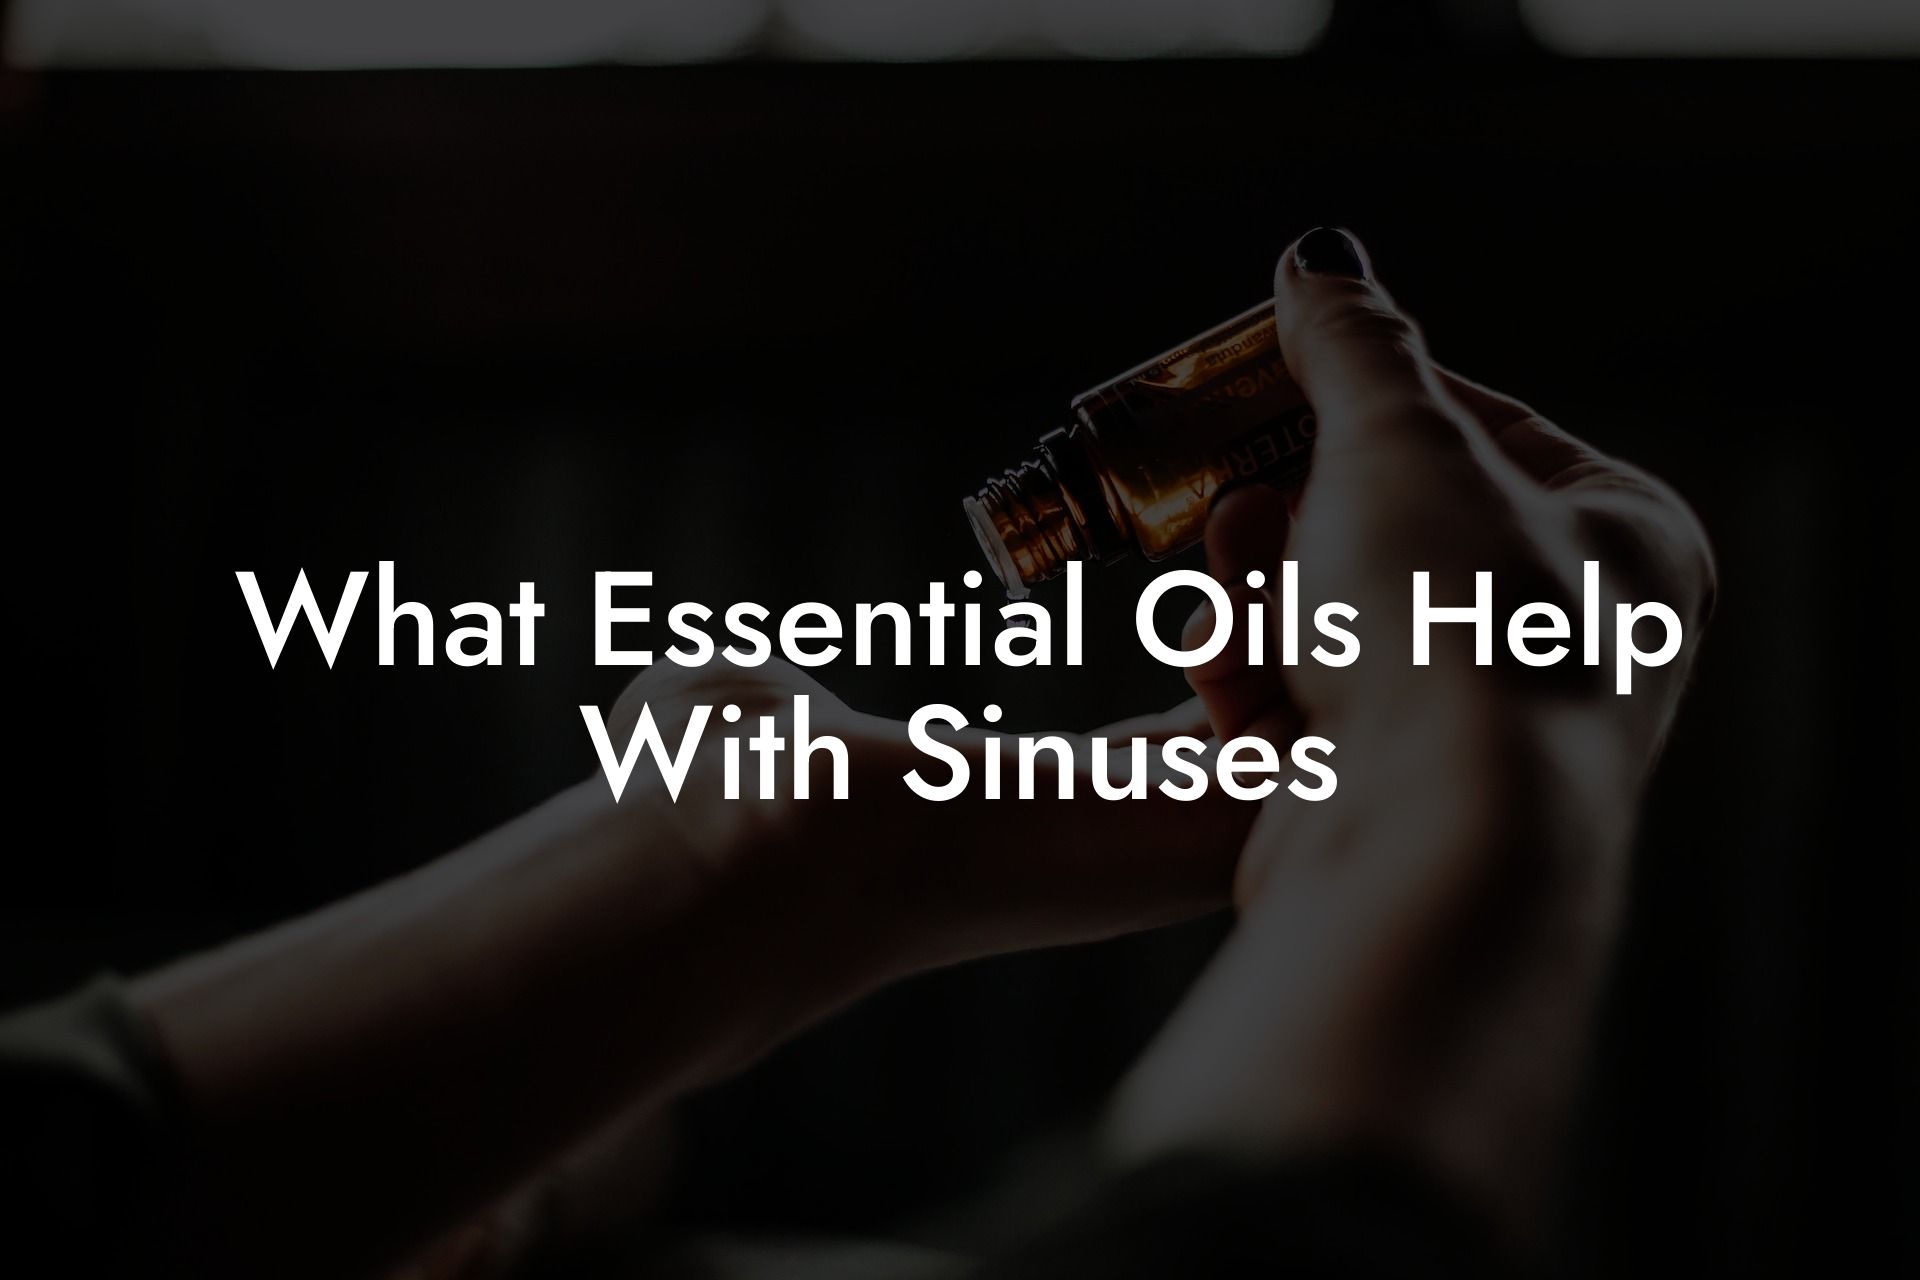 What Essential Oils Help With Sinuses